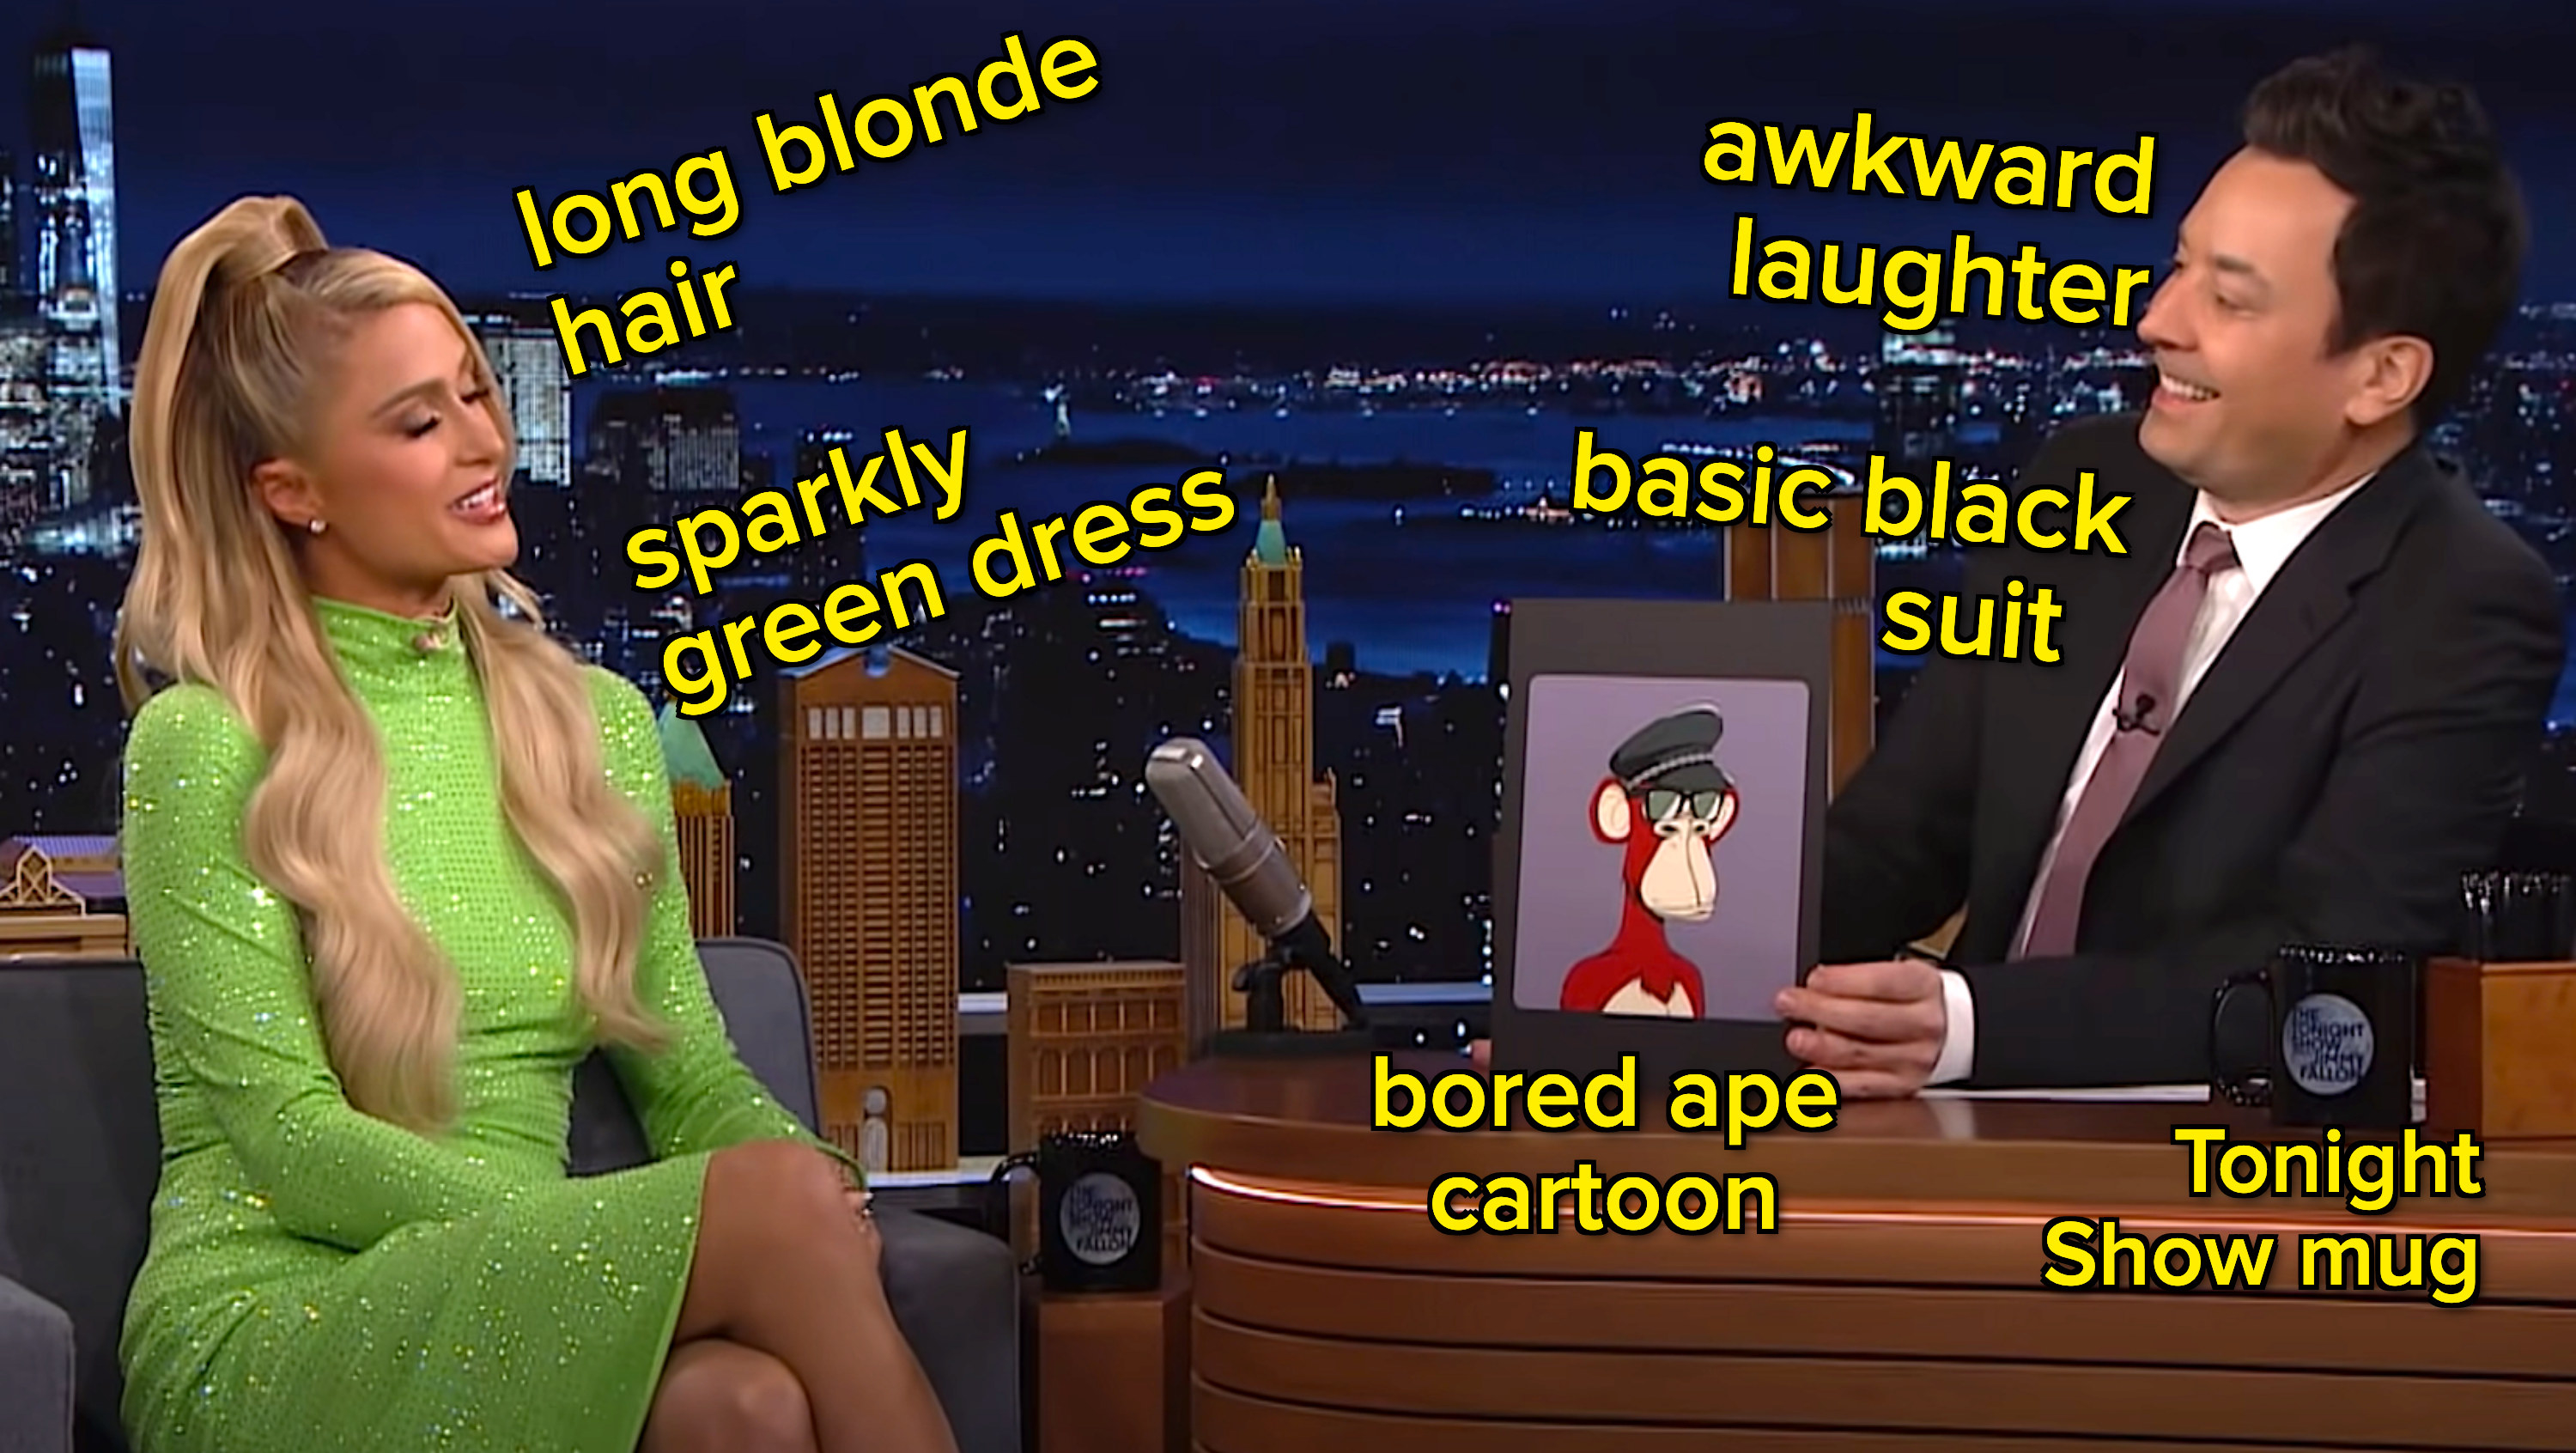 Paris and Jimmy during the interview, props include a sparkly green dress, black suit, bored ape cartoon and tonight show mug